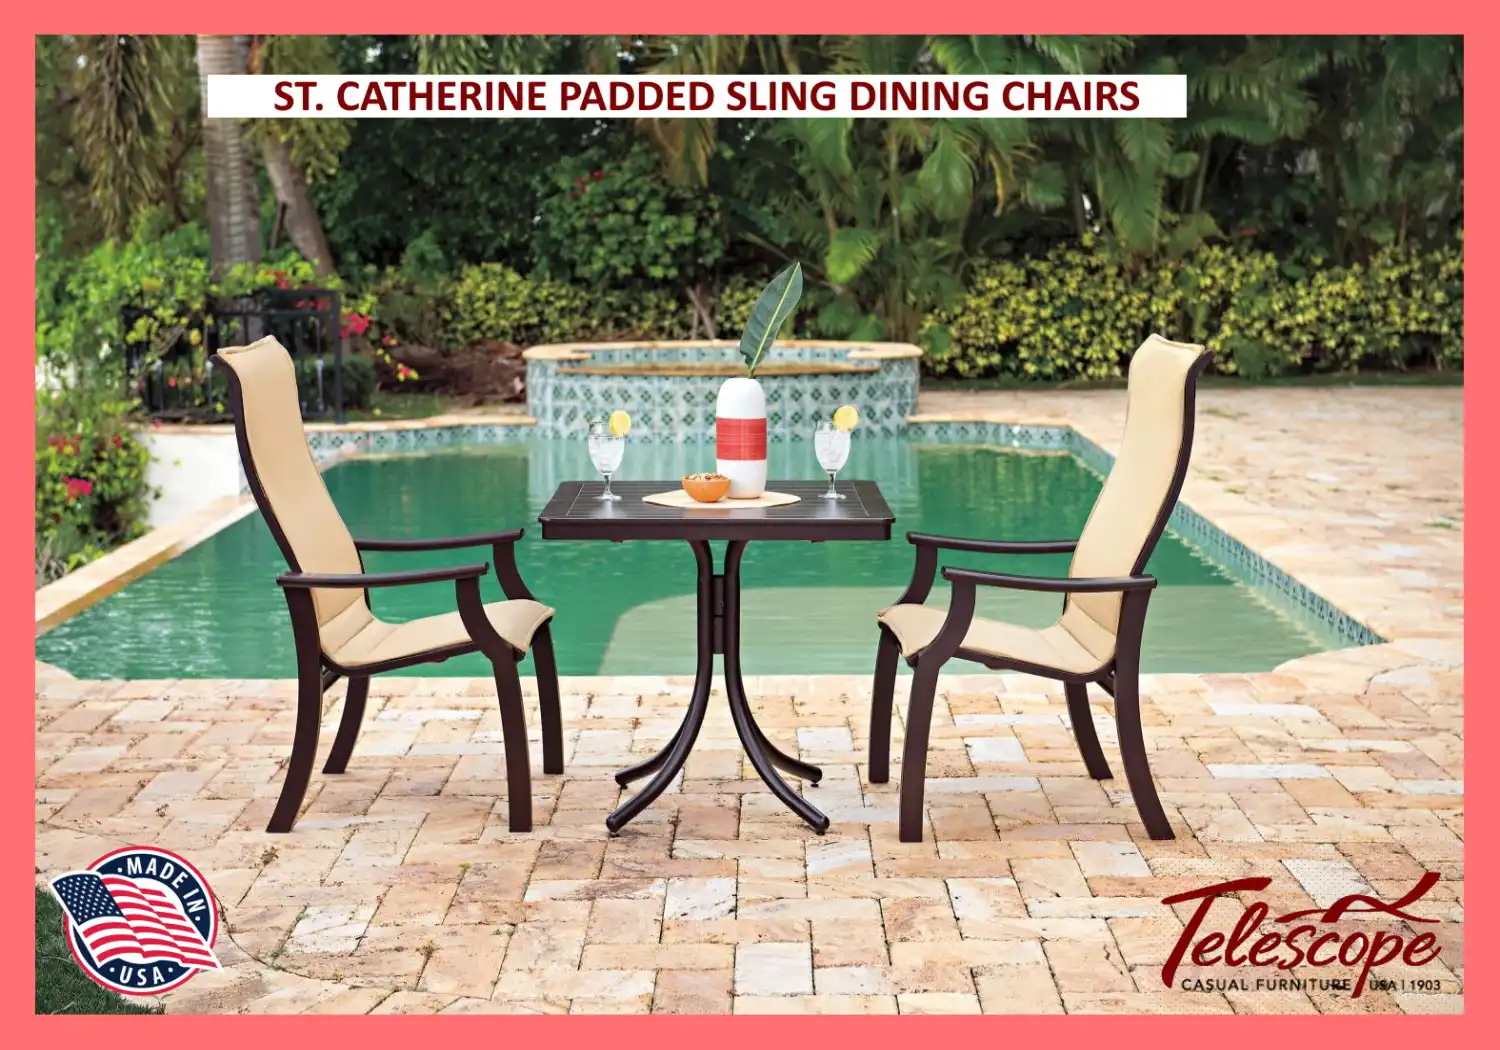 ST. CATHERINE PADDED SLING DINING CHAIRS